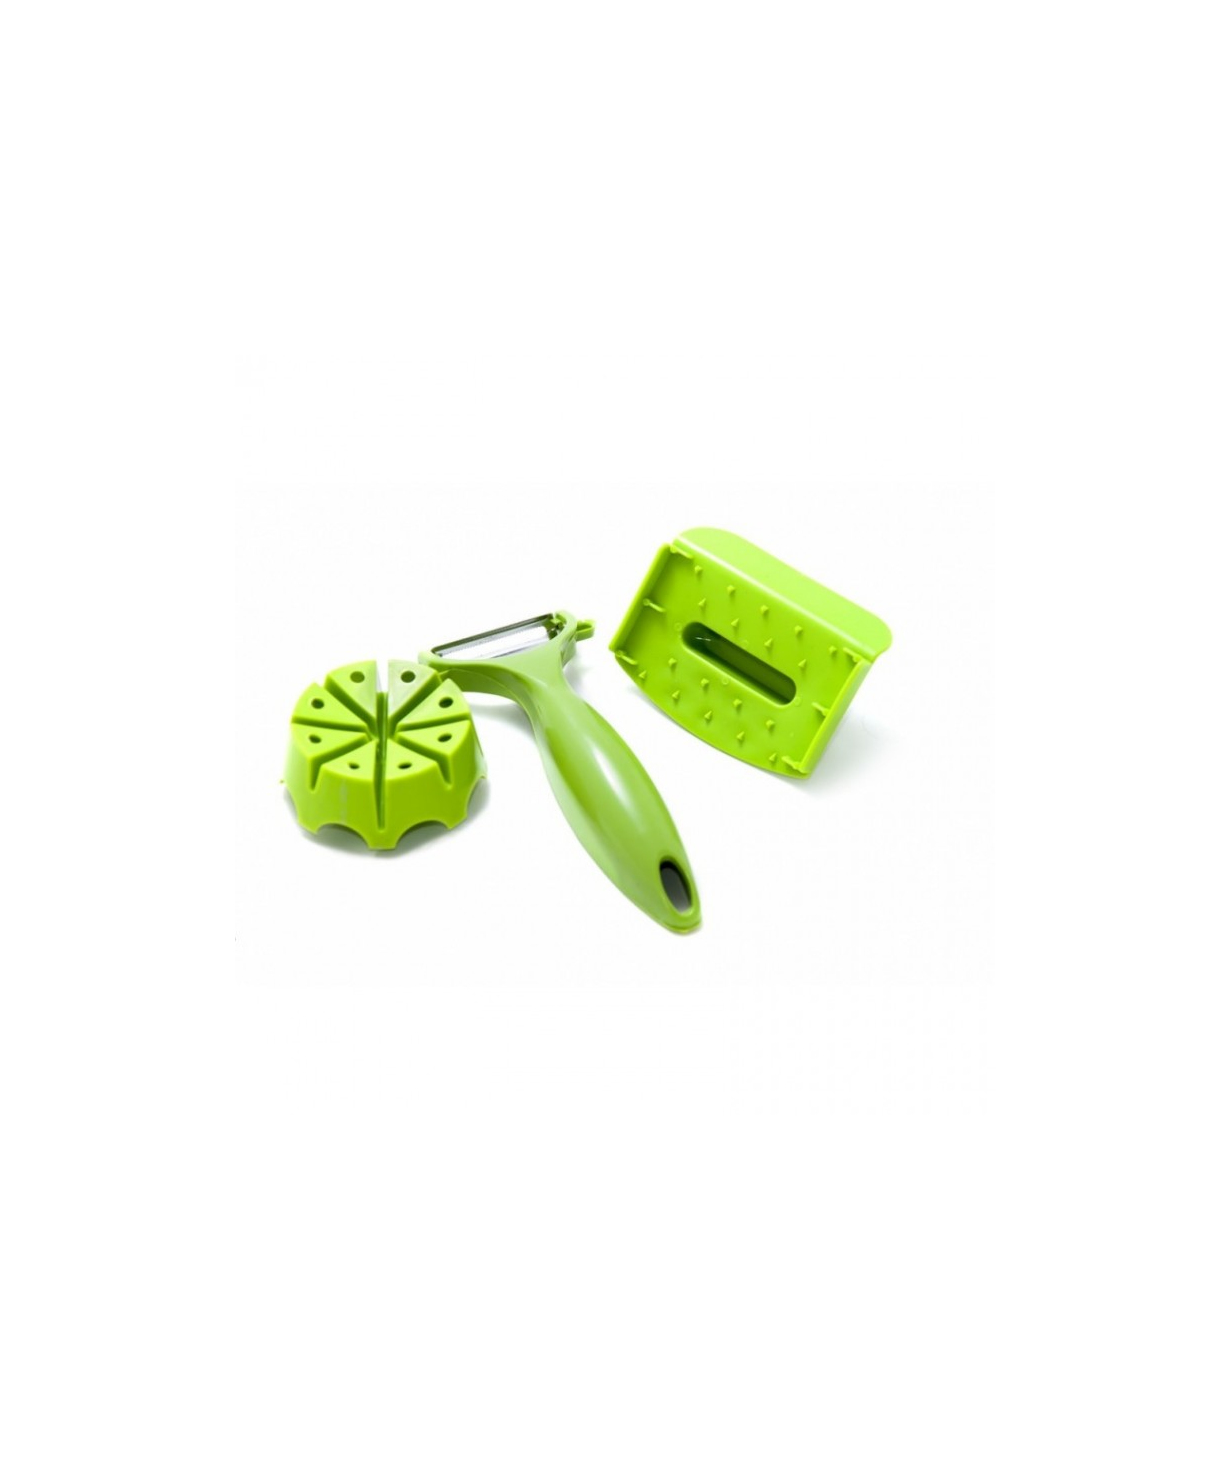 Set `Nicer Dicer` of cutters and scrapers